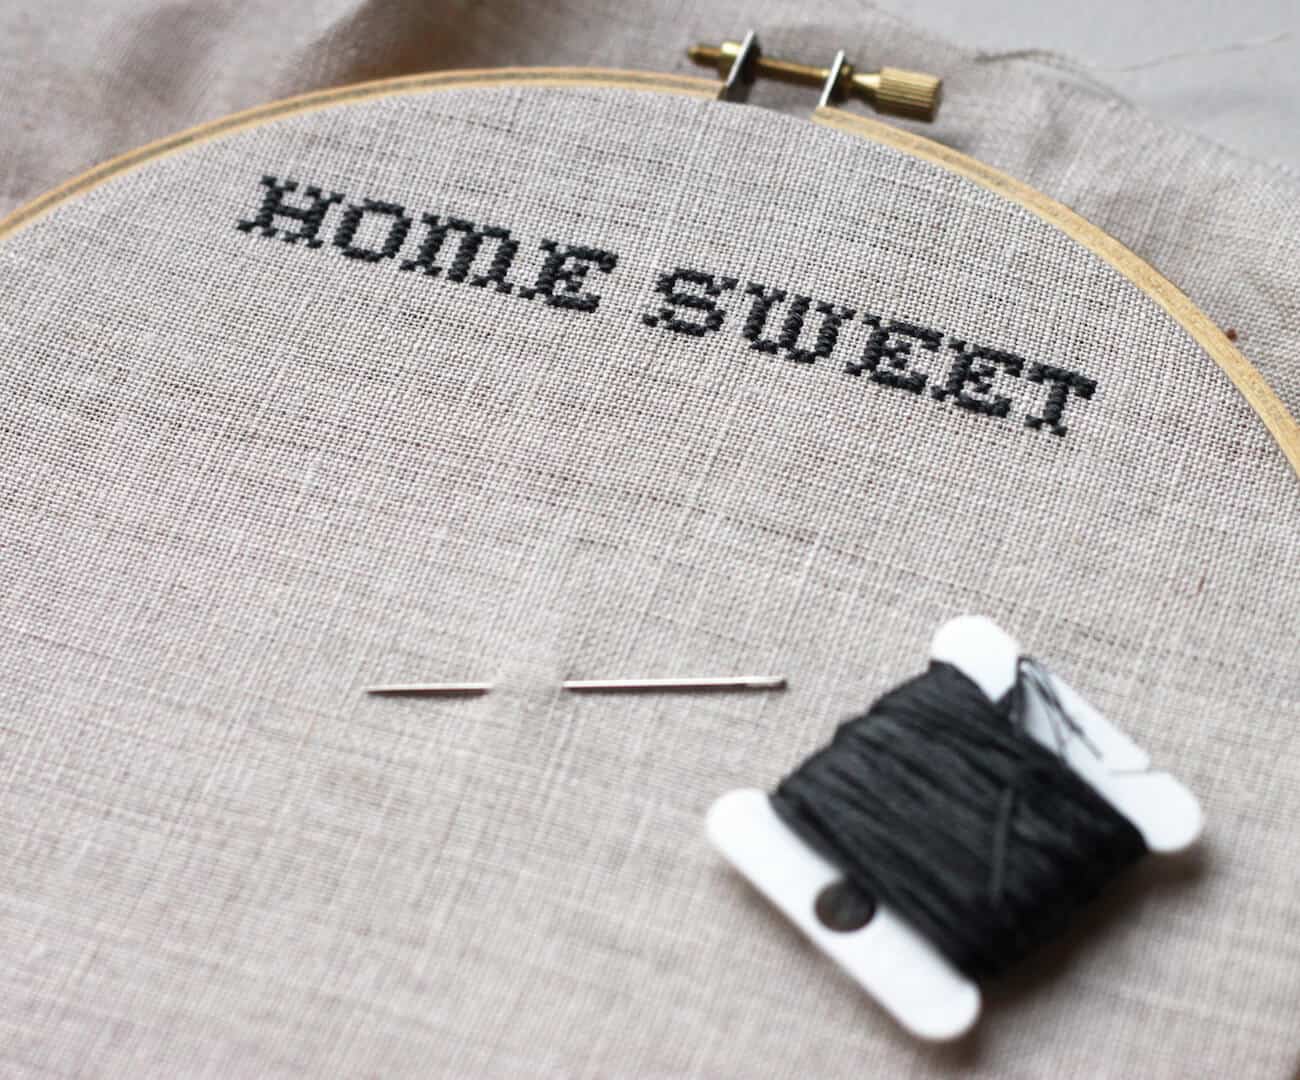 "Home Sweet" embroidered in black thread